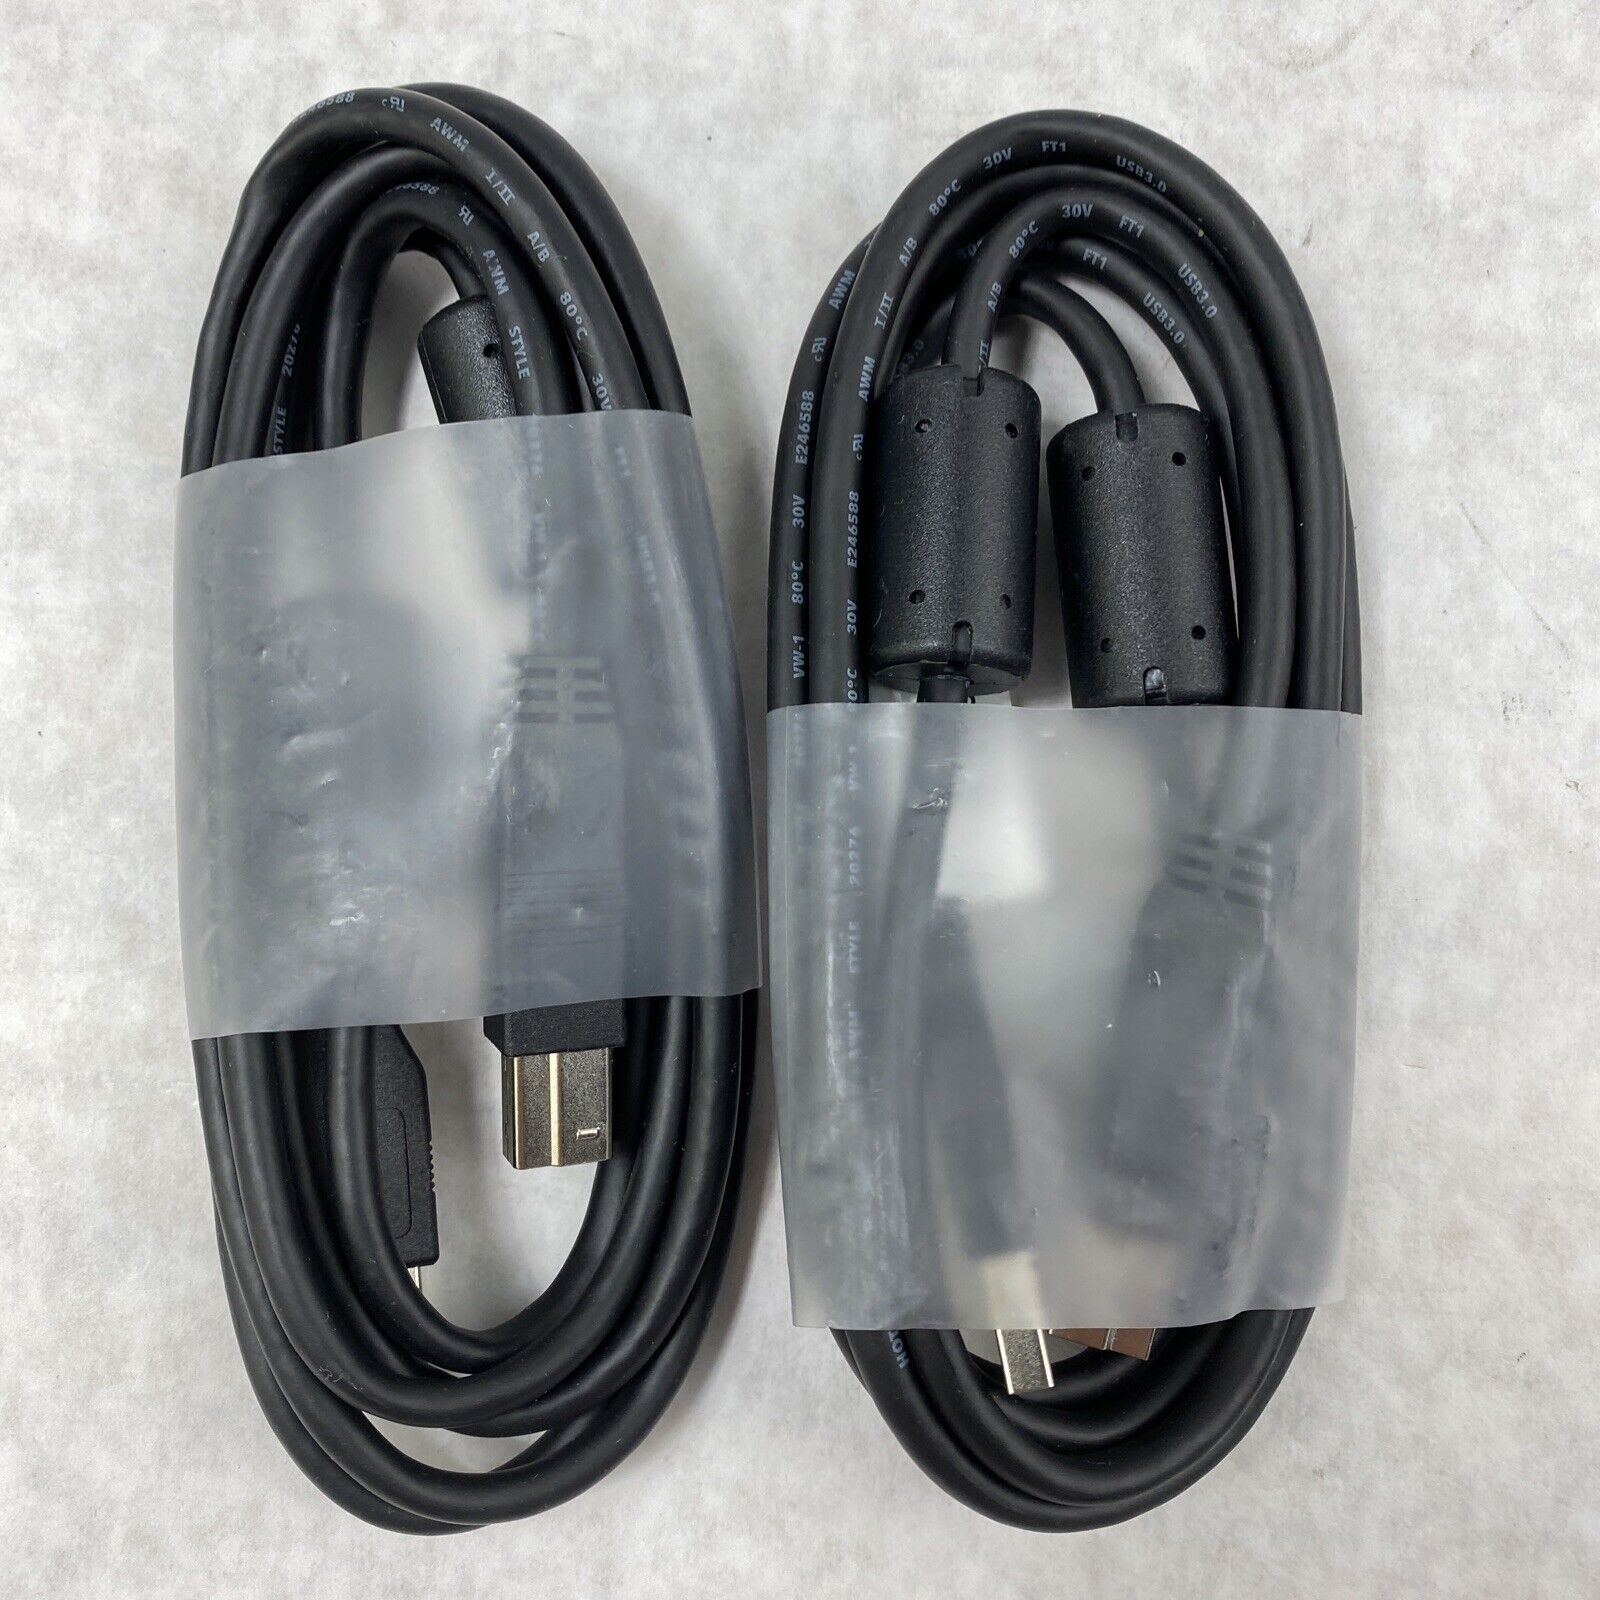 Lot(2) Genuine HP 917468 SS USB 3.0 Cable A-Male to B-Male 6ft Black